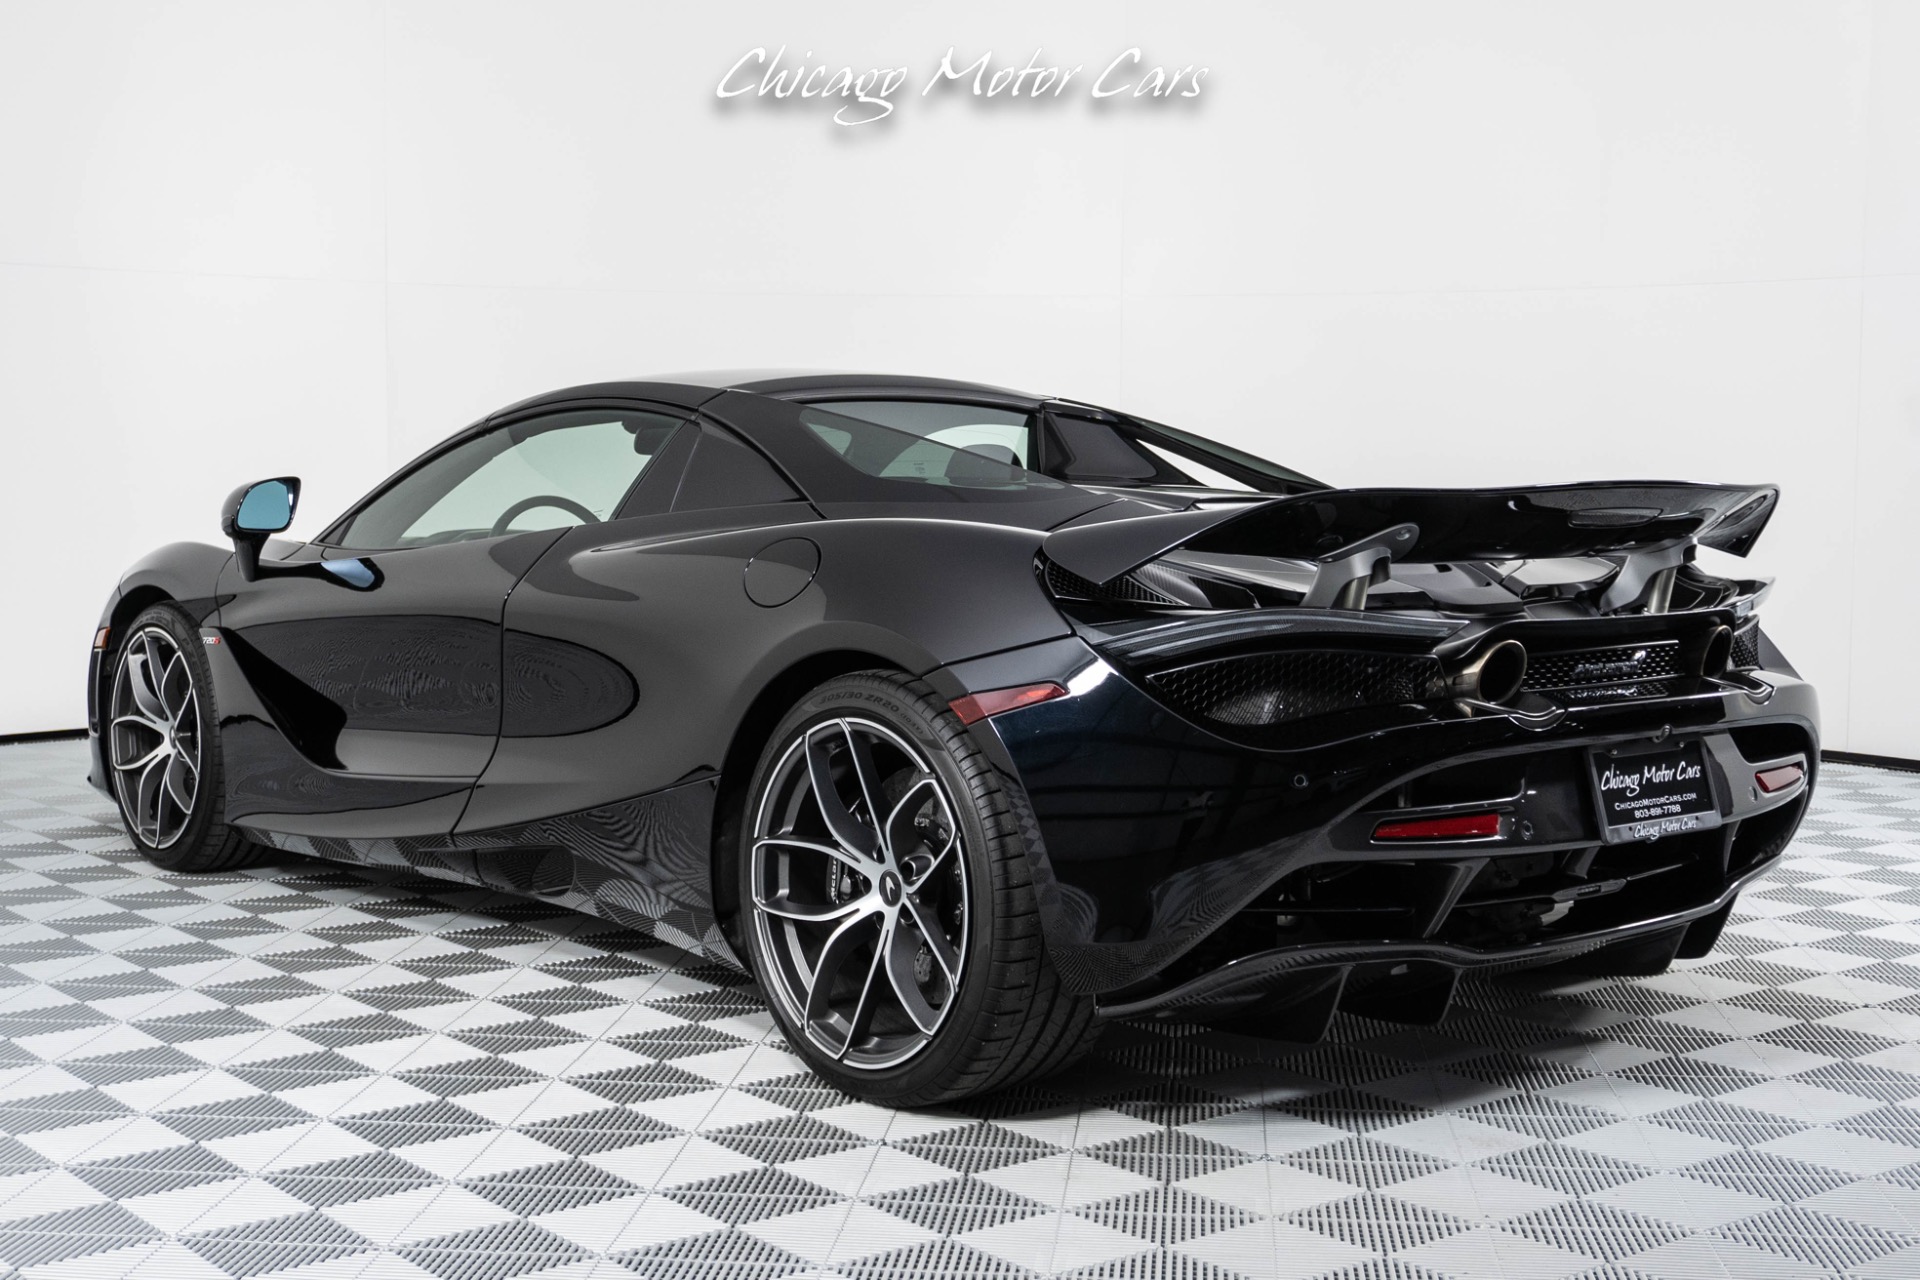 Used-2020-McLaren-720S-PERFORMANCE-SPIDER-RARE-MSO-BOREALIS-BLACK-385K-MSRP-SPORT-EXHAUST-ELECTROCHROMATIC-ROOF